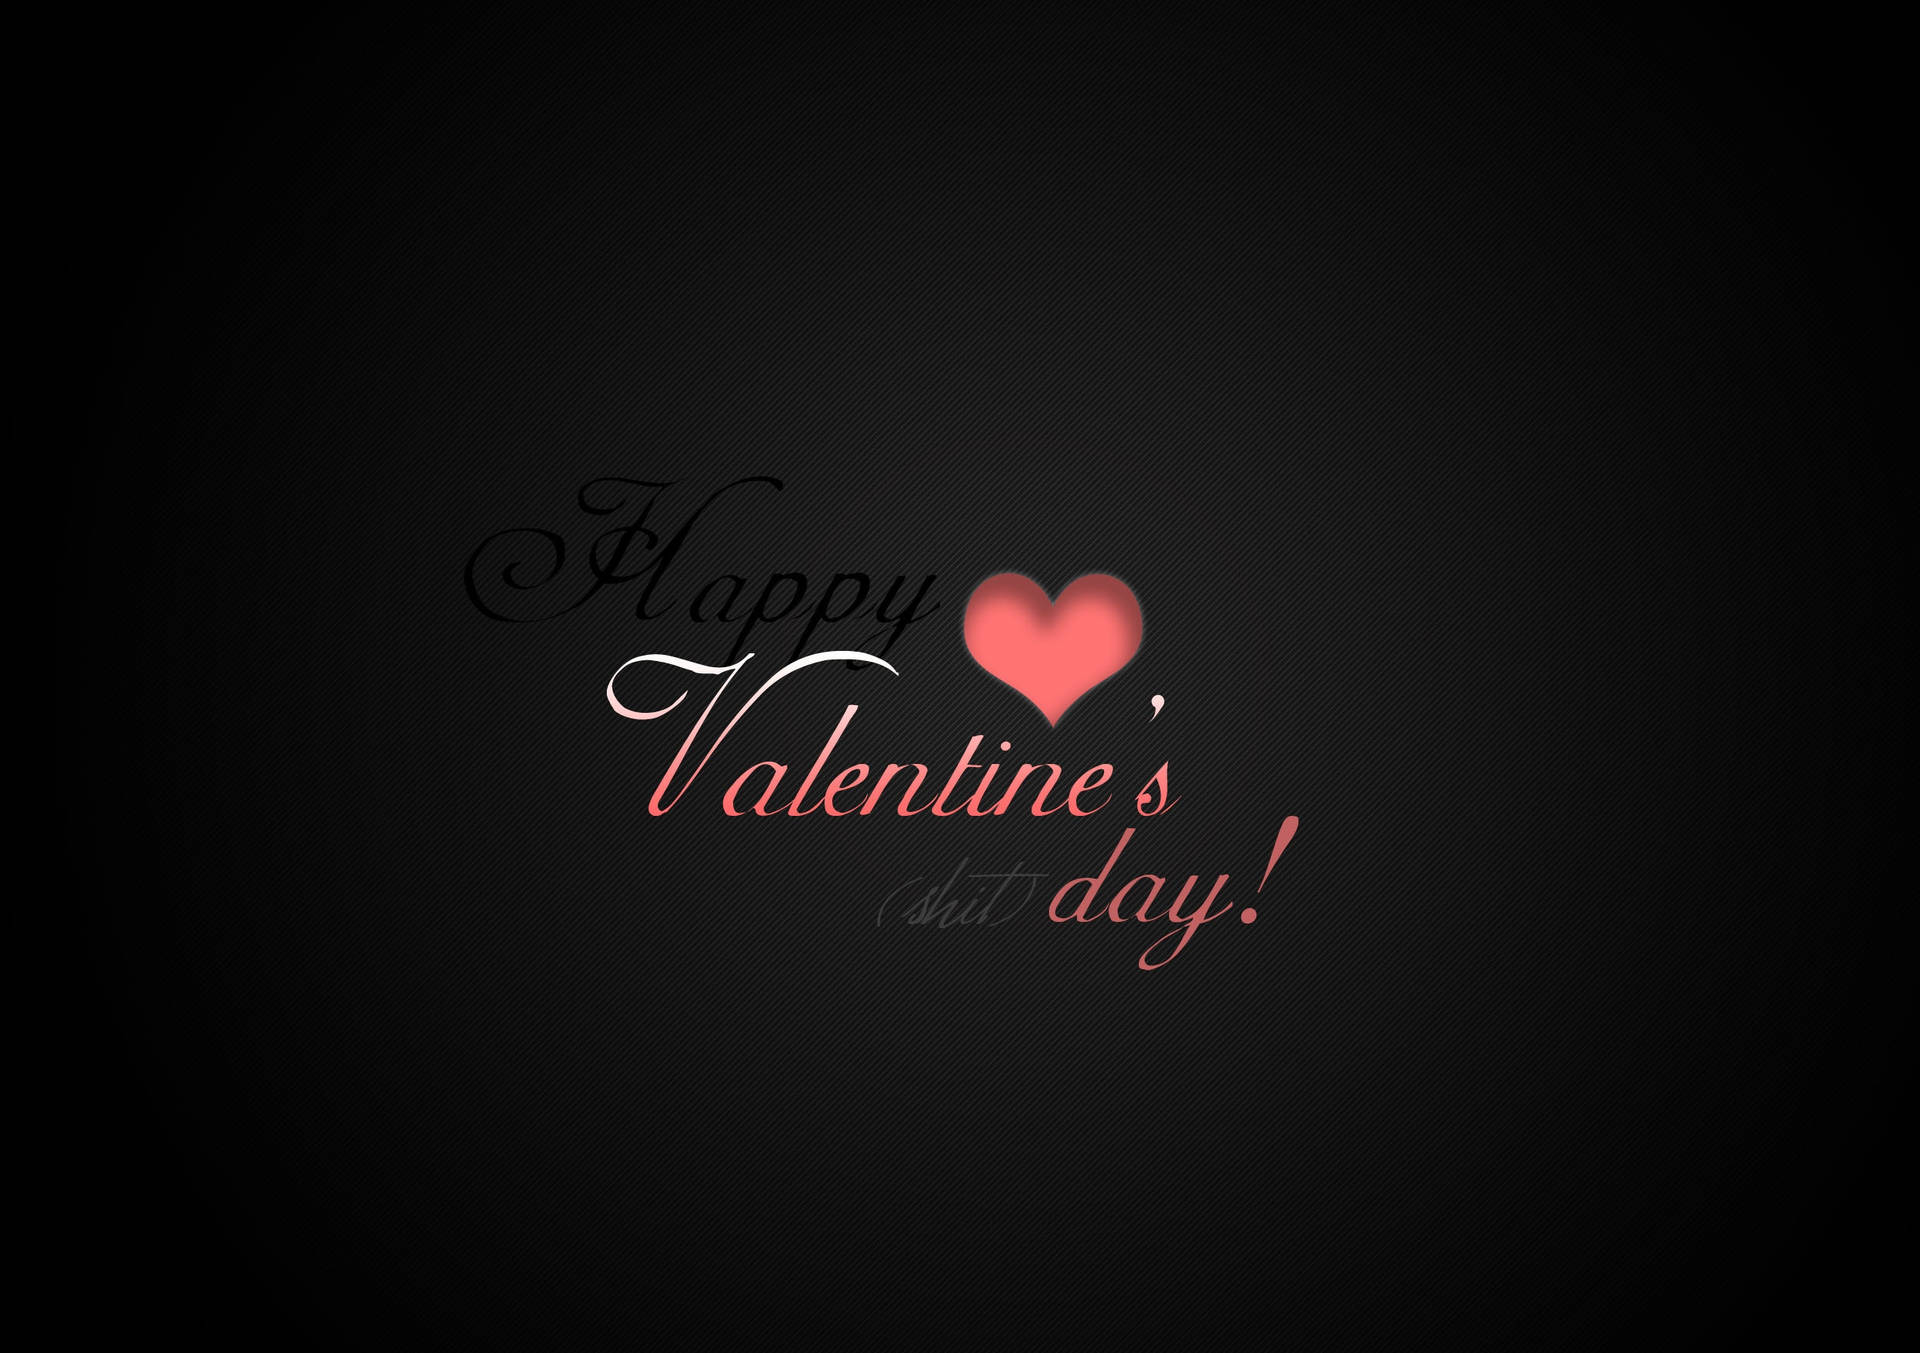 Happy Valentine's Day Wallpapers Wallpaper